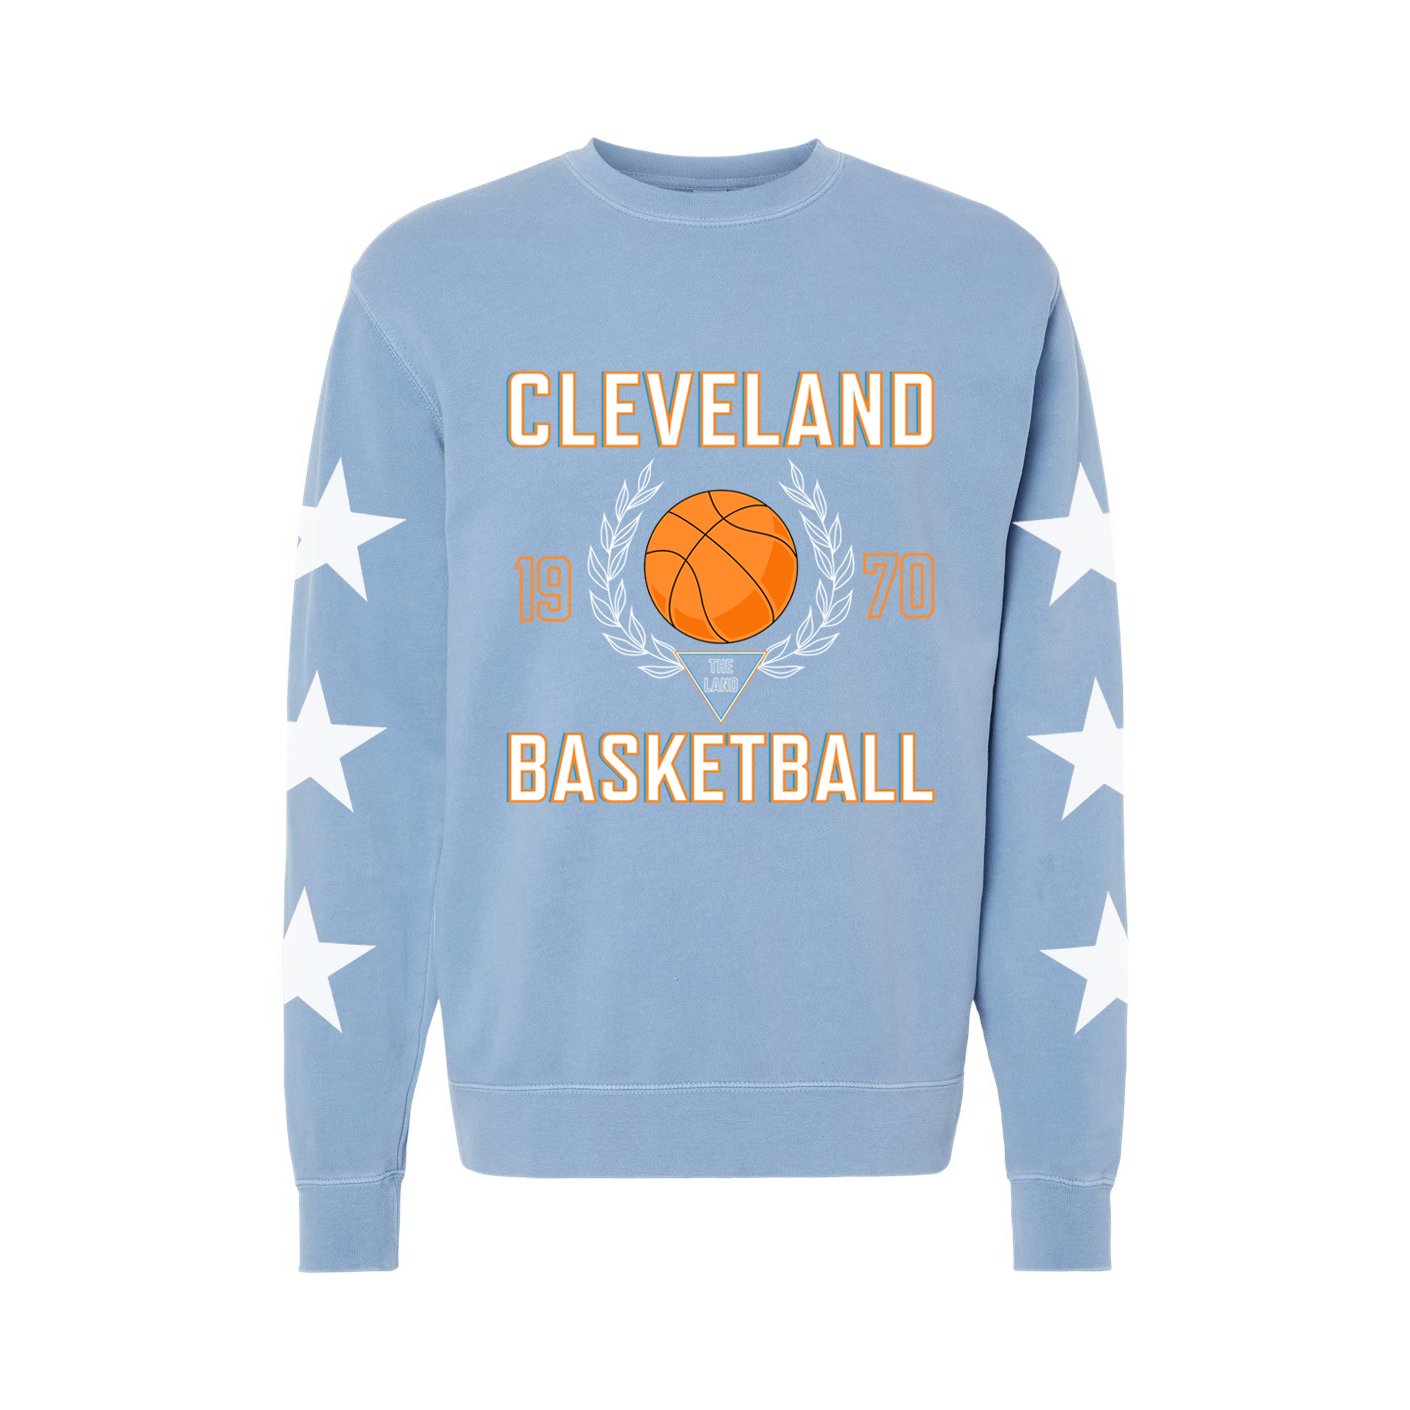 cleveland is magical shirt